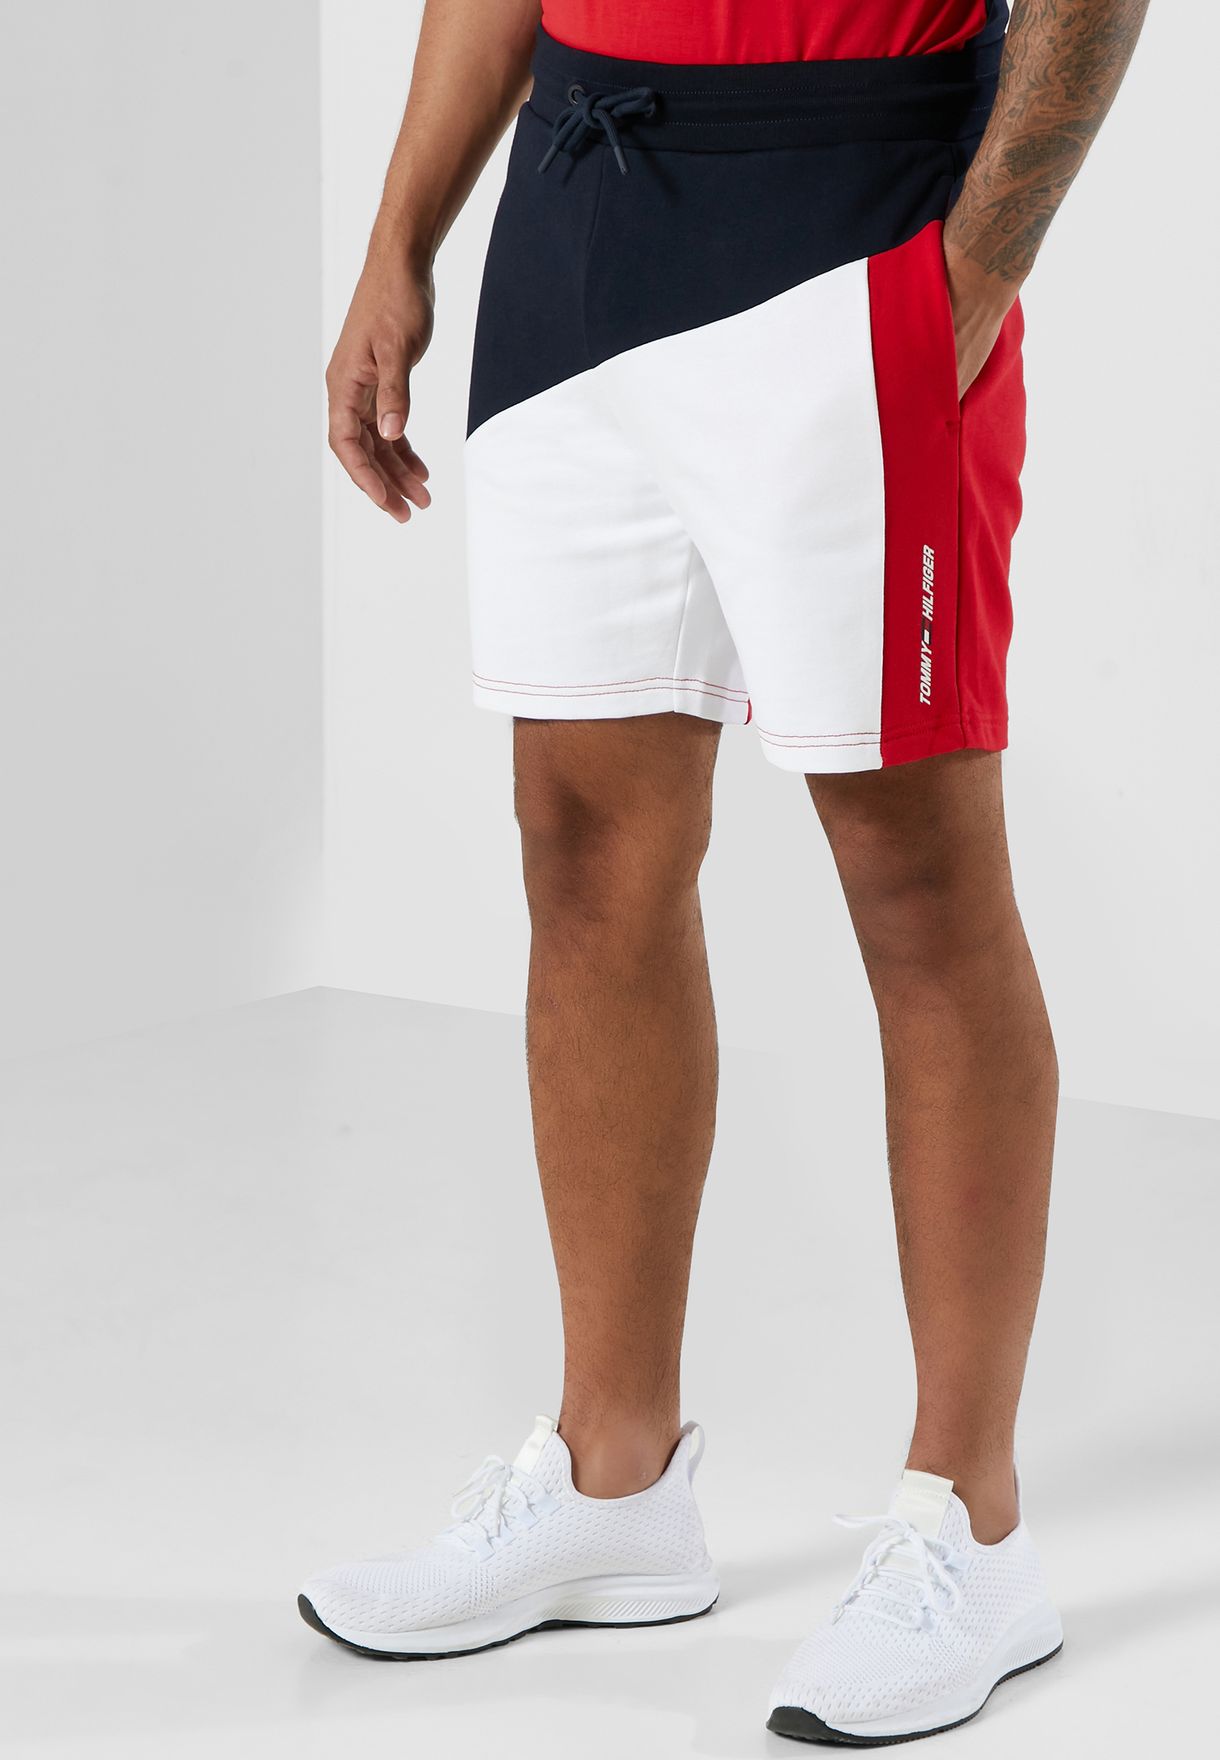 Buy > tommy hilfiger terry shorts > in stock